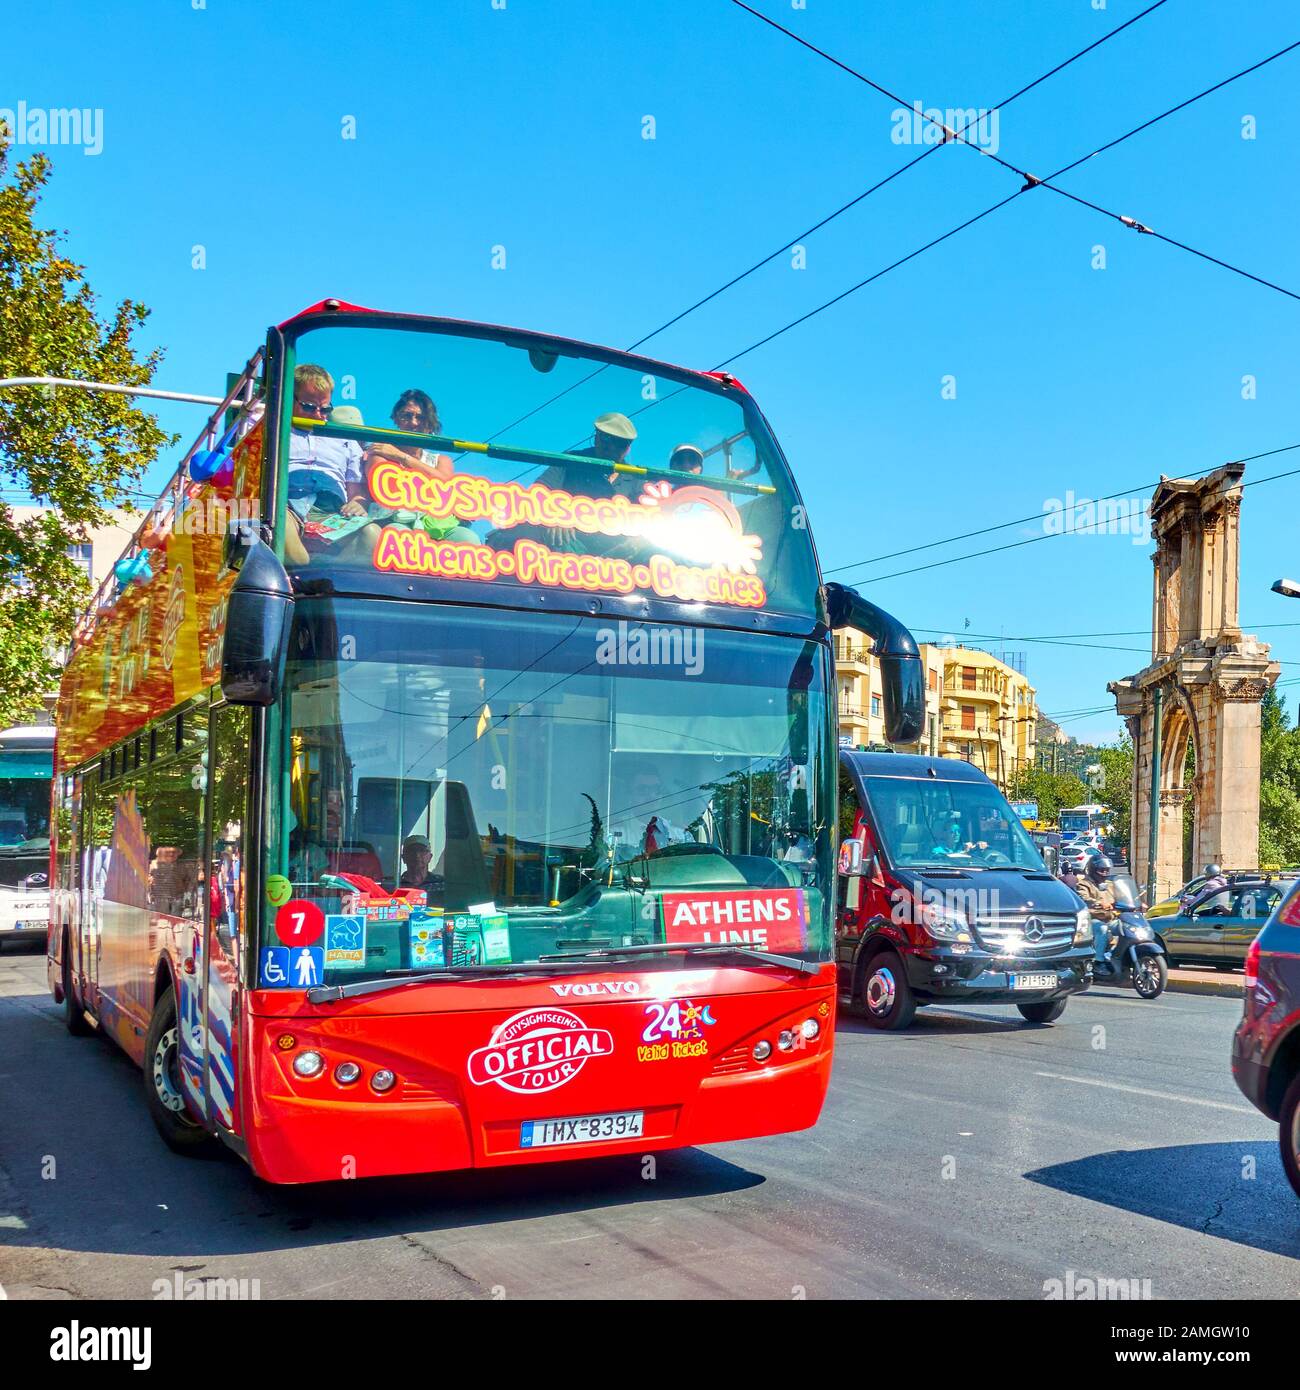 sweater Faial holdall Athens, Greece - September 21, 2019: Open-top double-decker City Sightseeing  Bus in Athens (Red route Stock Photo - Alamy